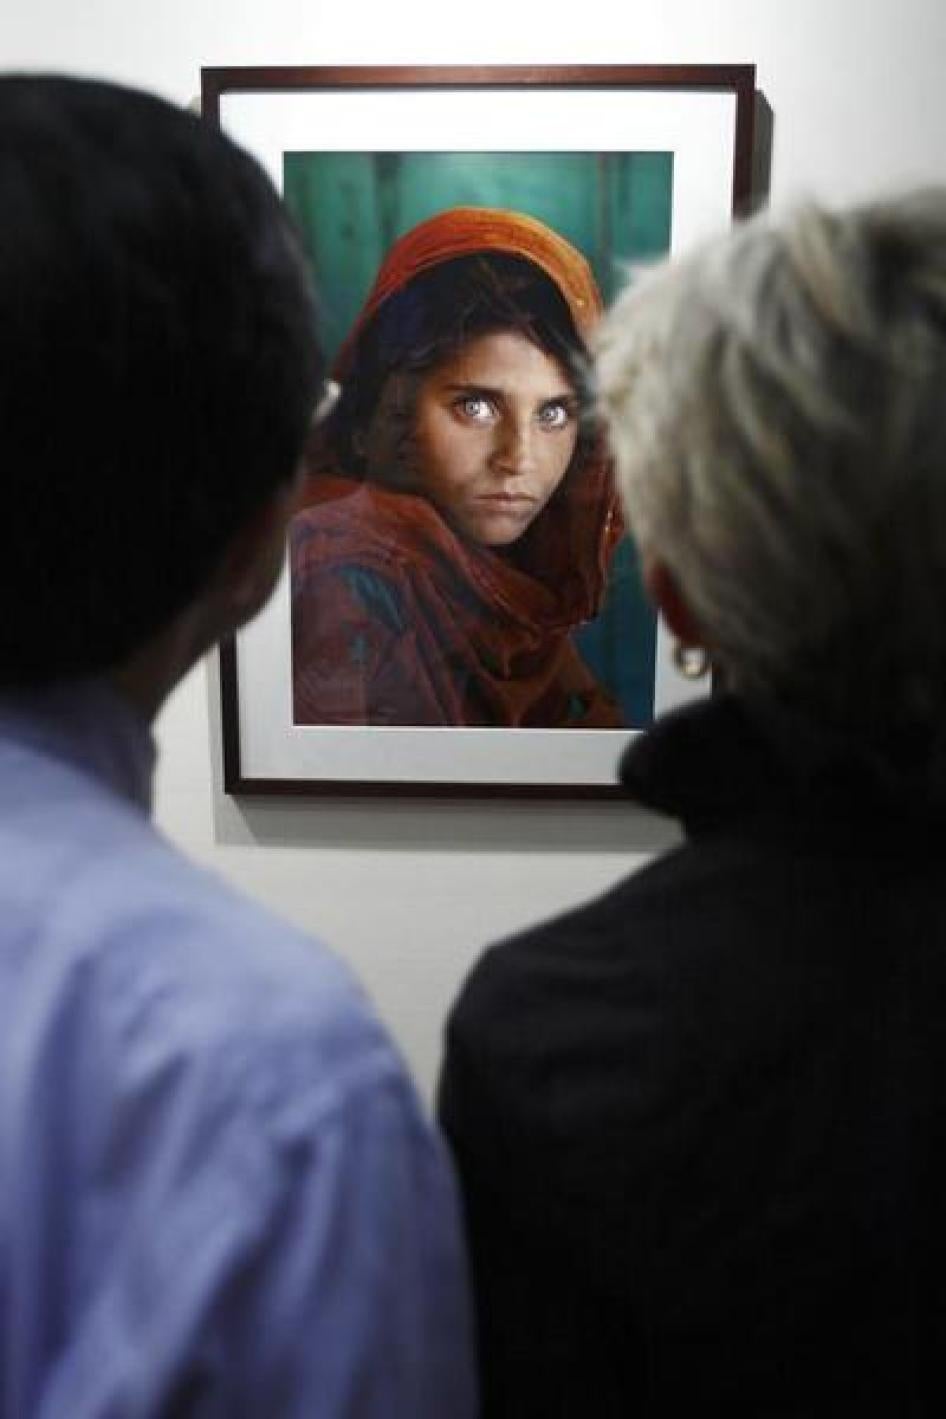 Visitors look at the "Afghan Girl" photo during U.S. photographer Steve McCurry's exhibition at the Asian Civilisation Museum in Singapore June 26, 2009.